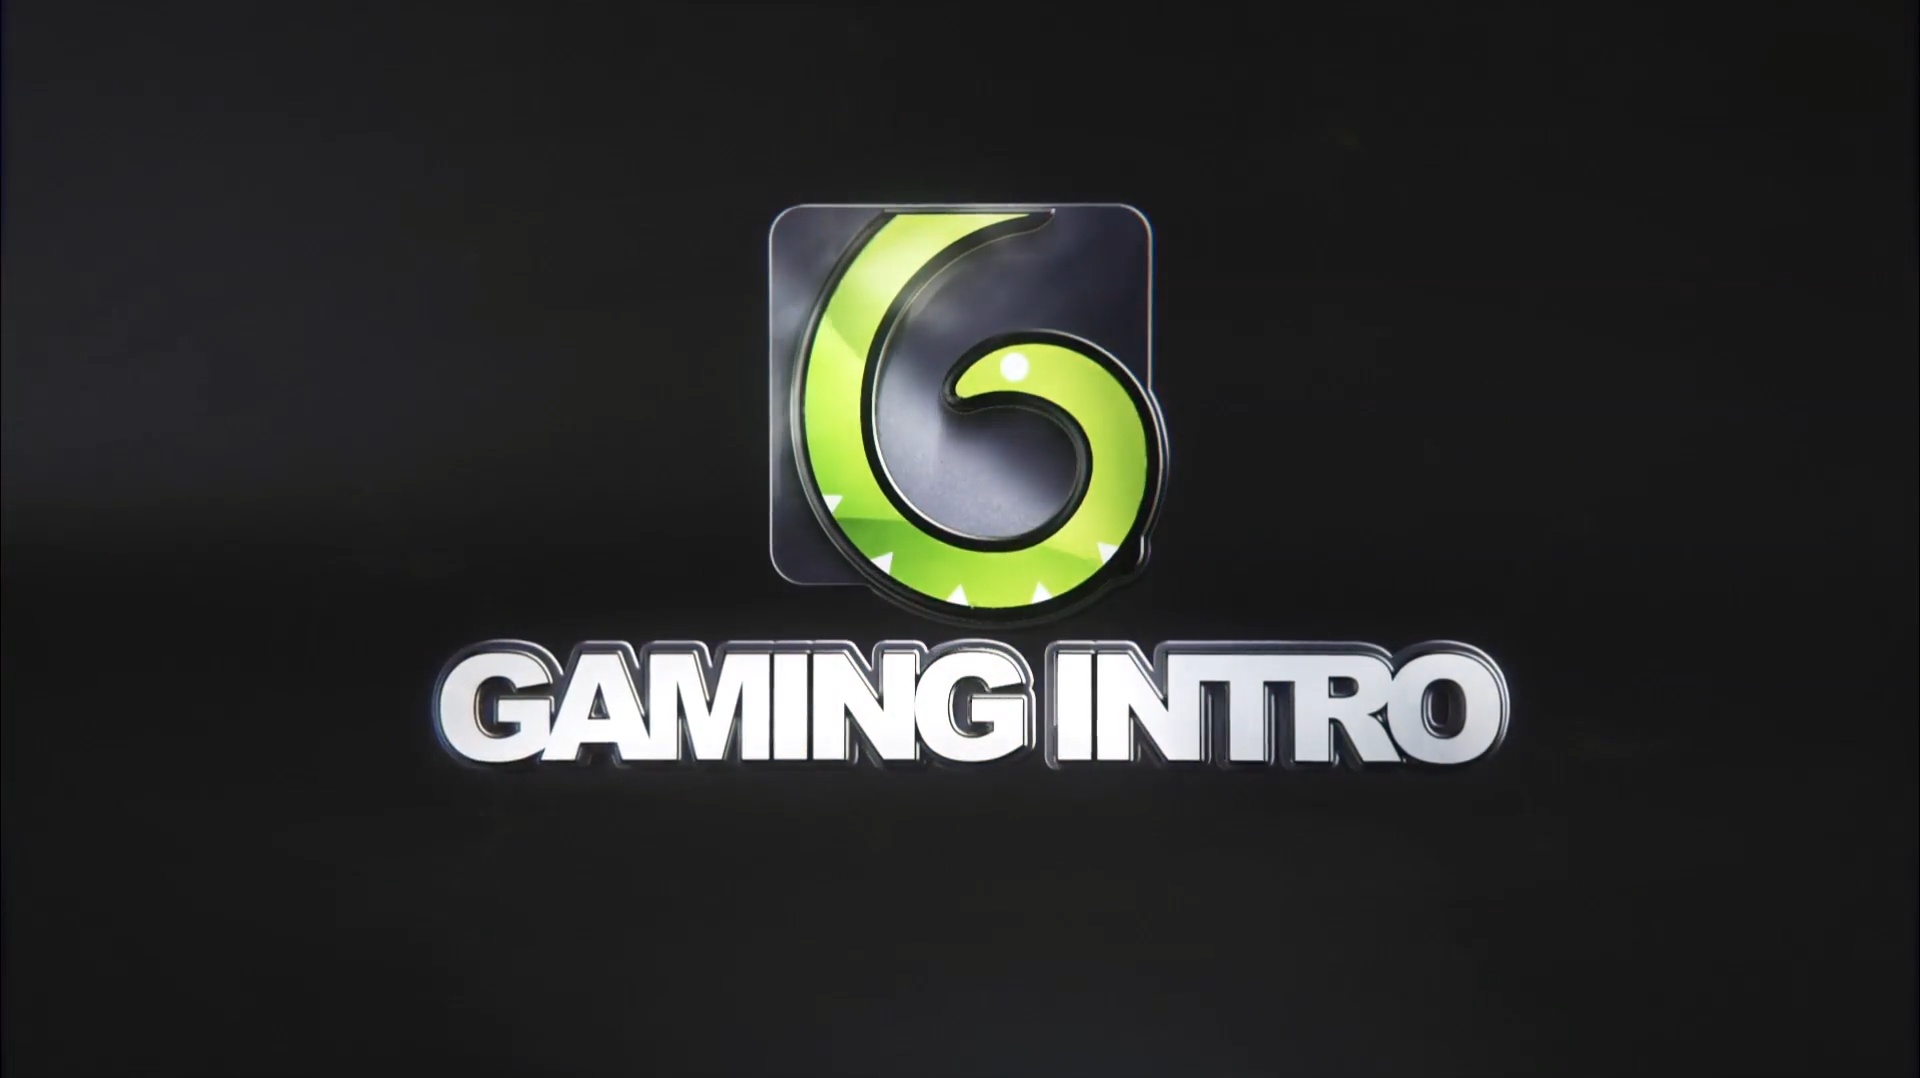 Gaming Intro Maker - Use [Free] Online Gaming Intro Video Templates